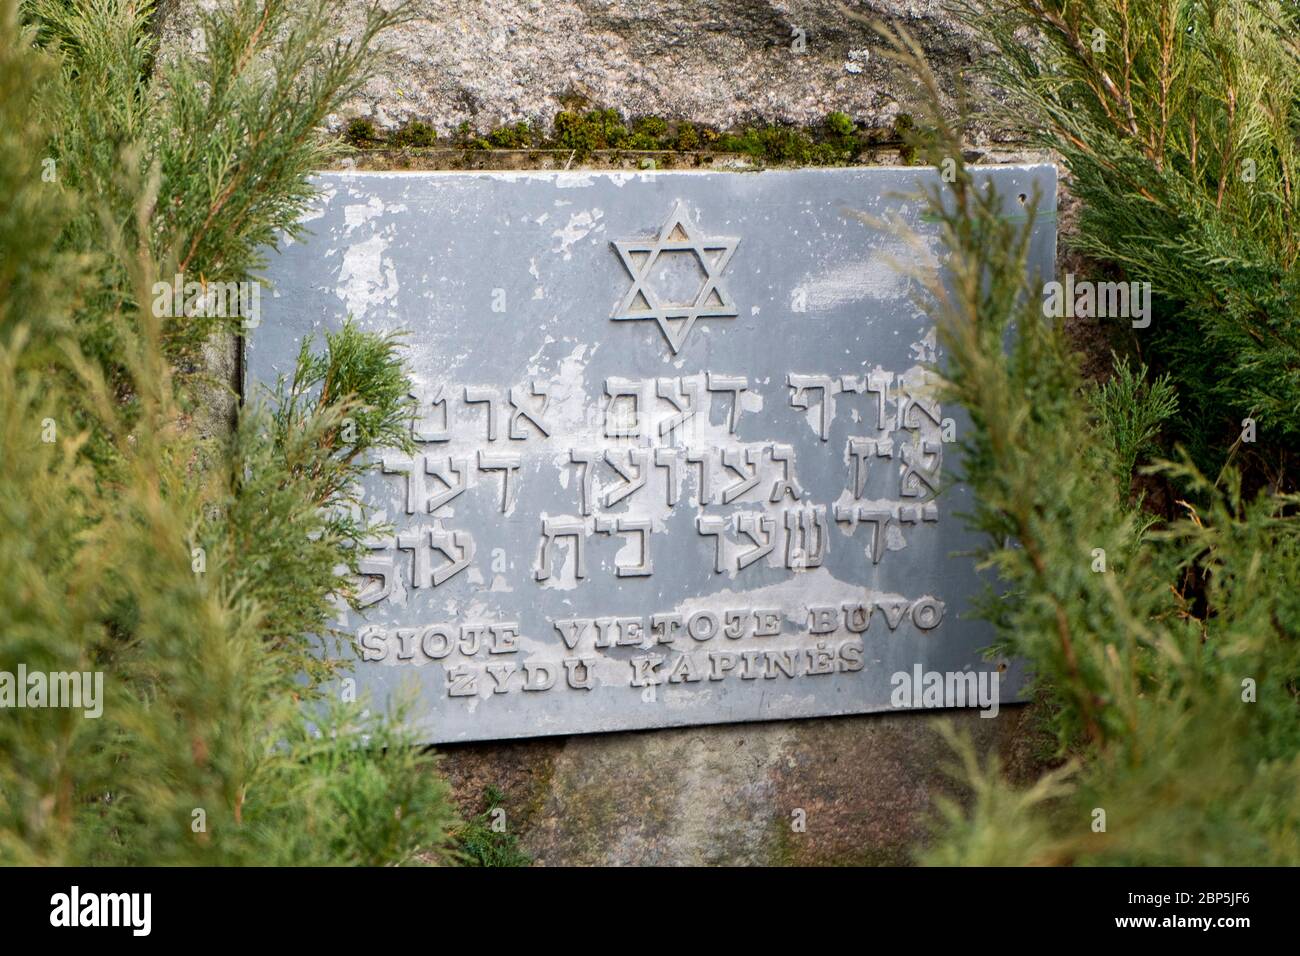 A plaque memorializing the former site of a Jewish cemetery. Text in Hebrew and Lithuanian. In Eišiškės, Lithuania. The town is the source for the pho Stock Photo